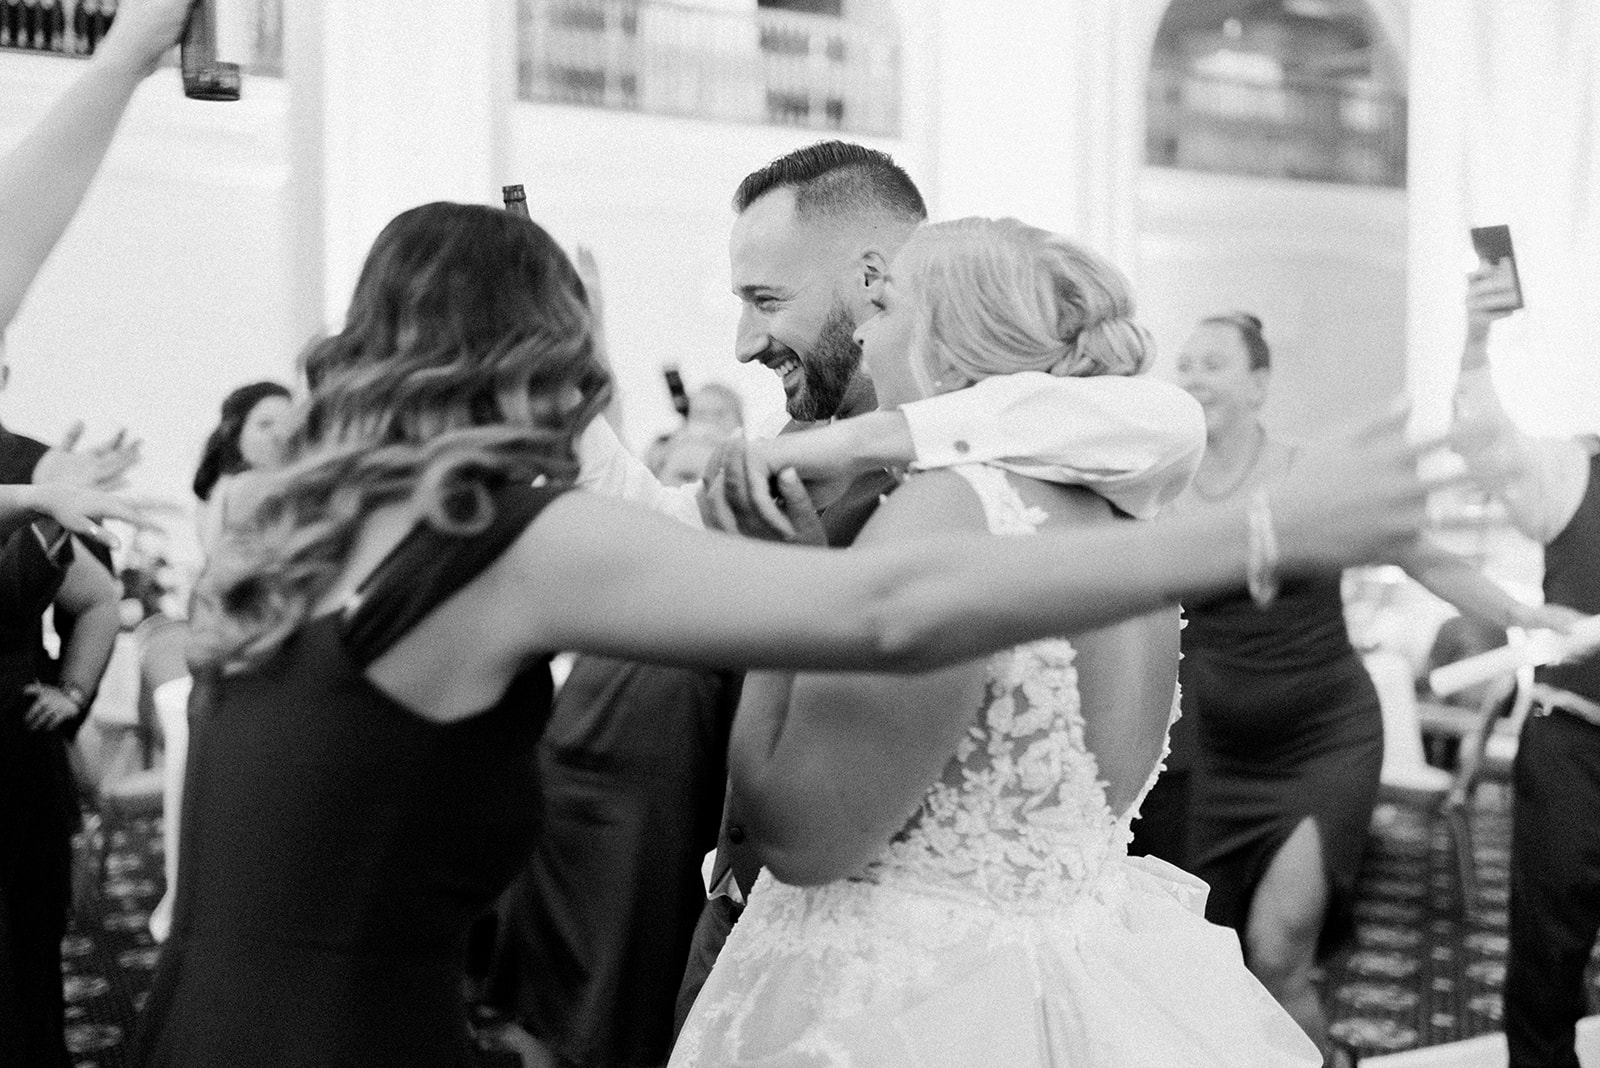 Pennsylvania wedding photographer captures couple celebrating with friends and family